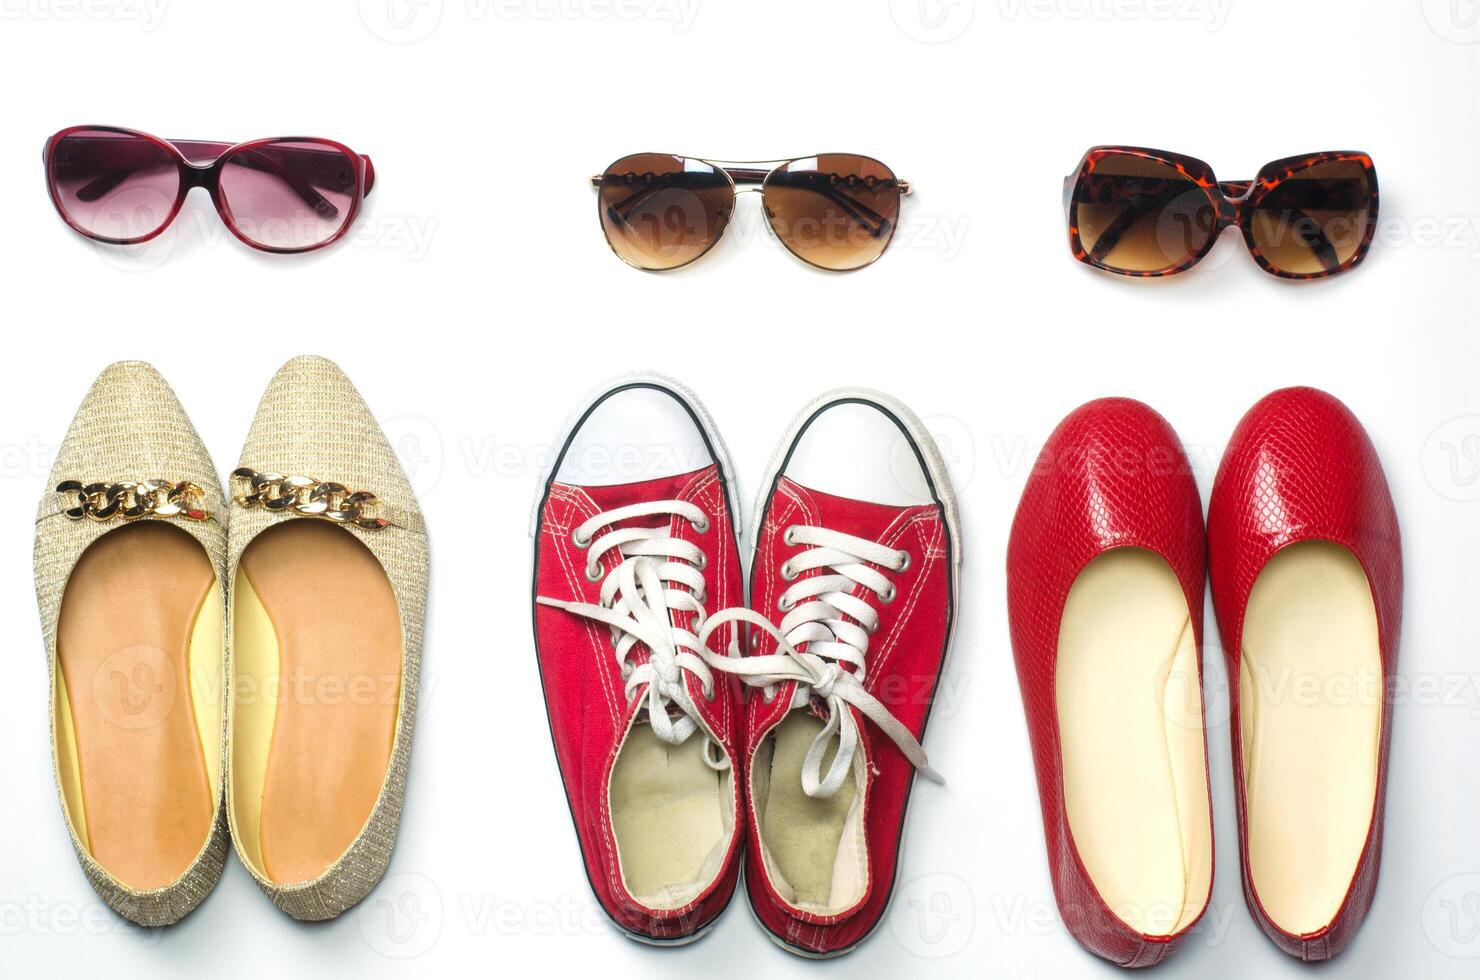 Placed shoes and sunglasses on a white background styles - lifestyles photo